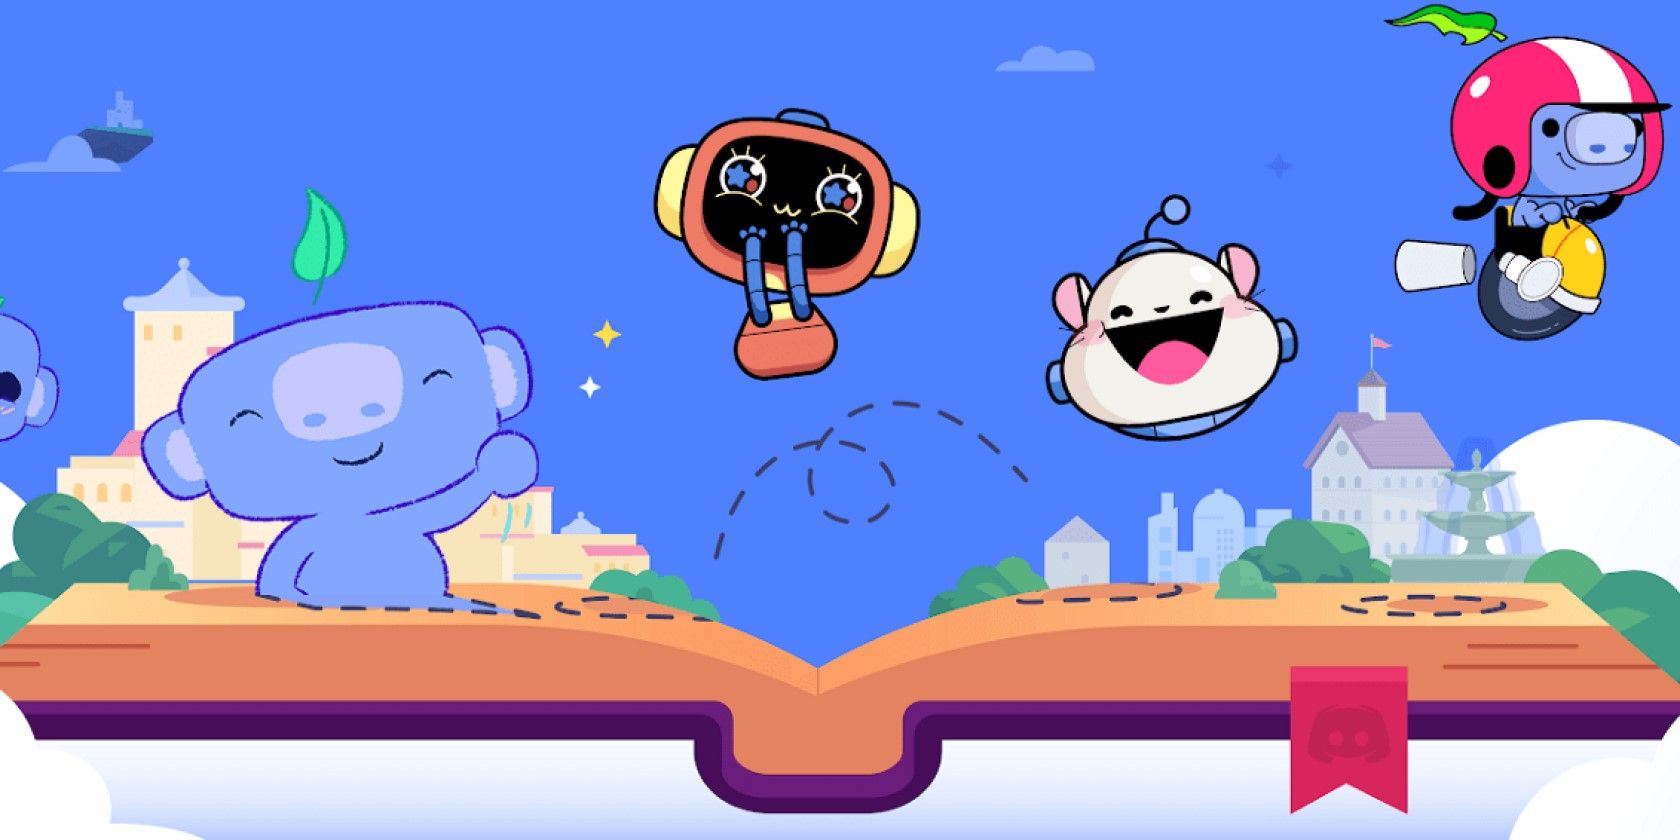 Discord Brings Animated Stickers to Chats